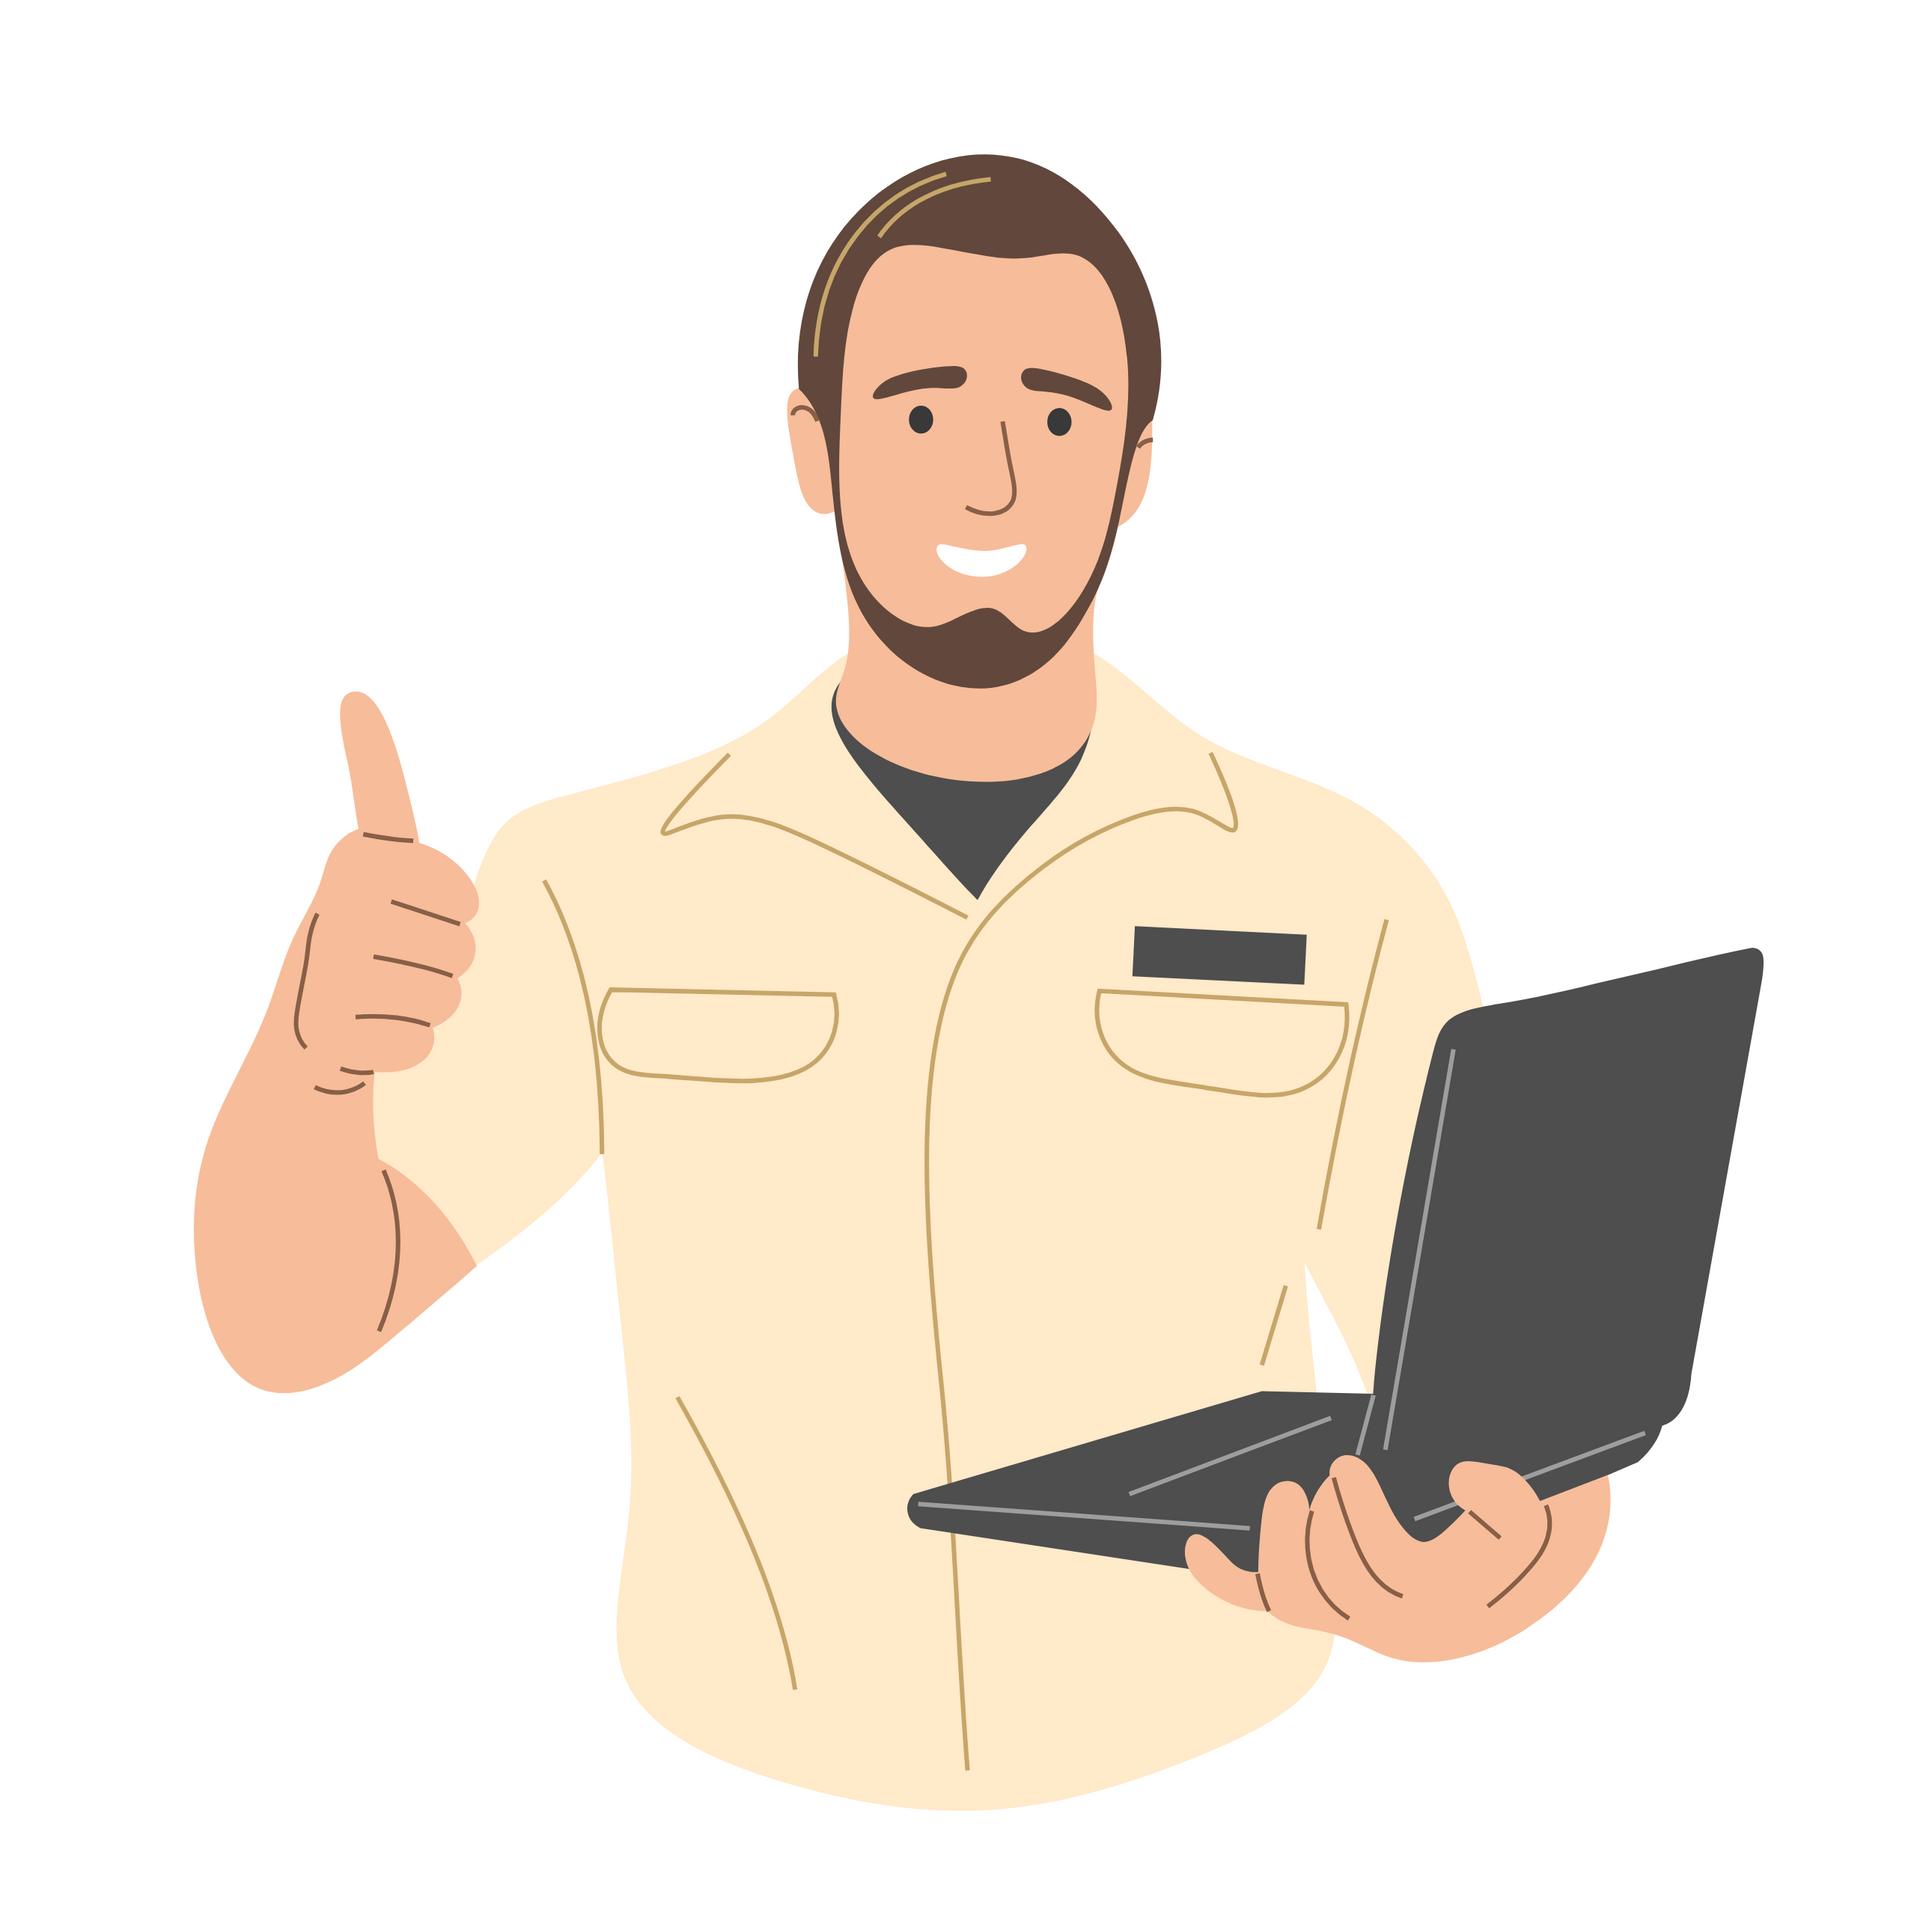 A man is holding a laptop computer and giving a thumbs up.